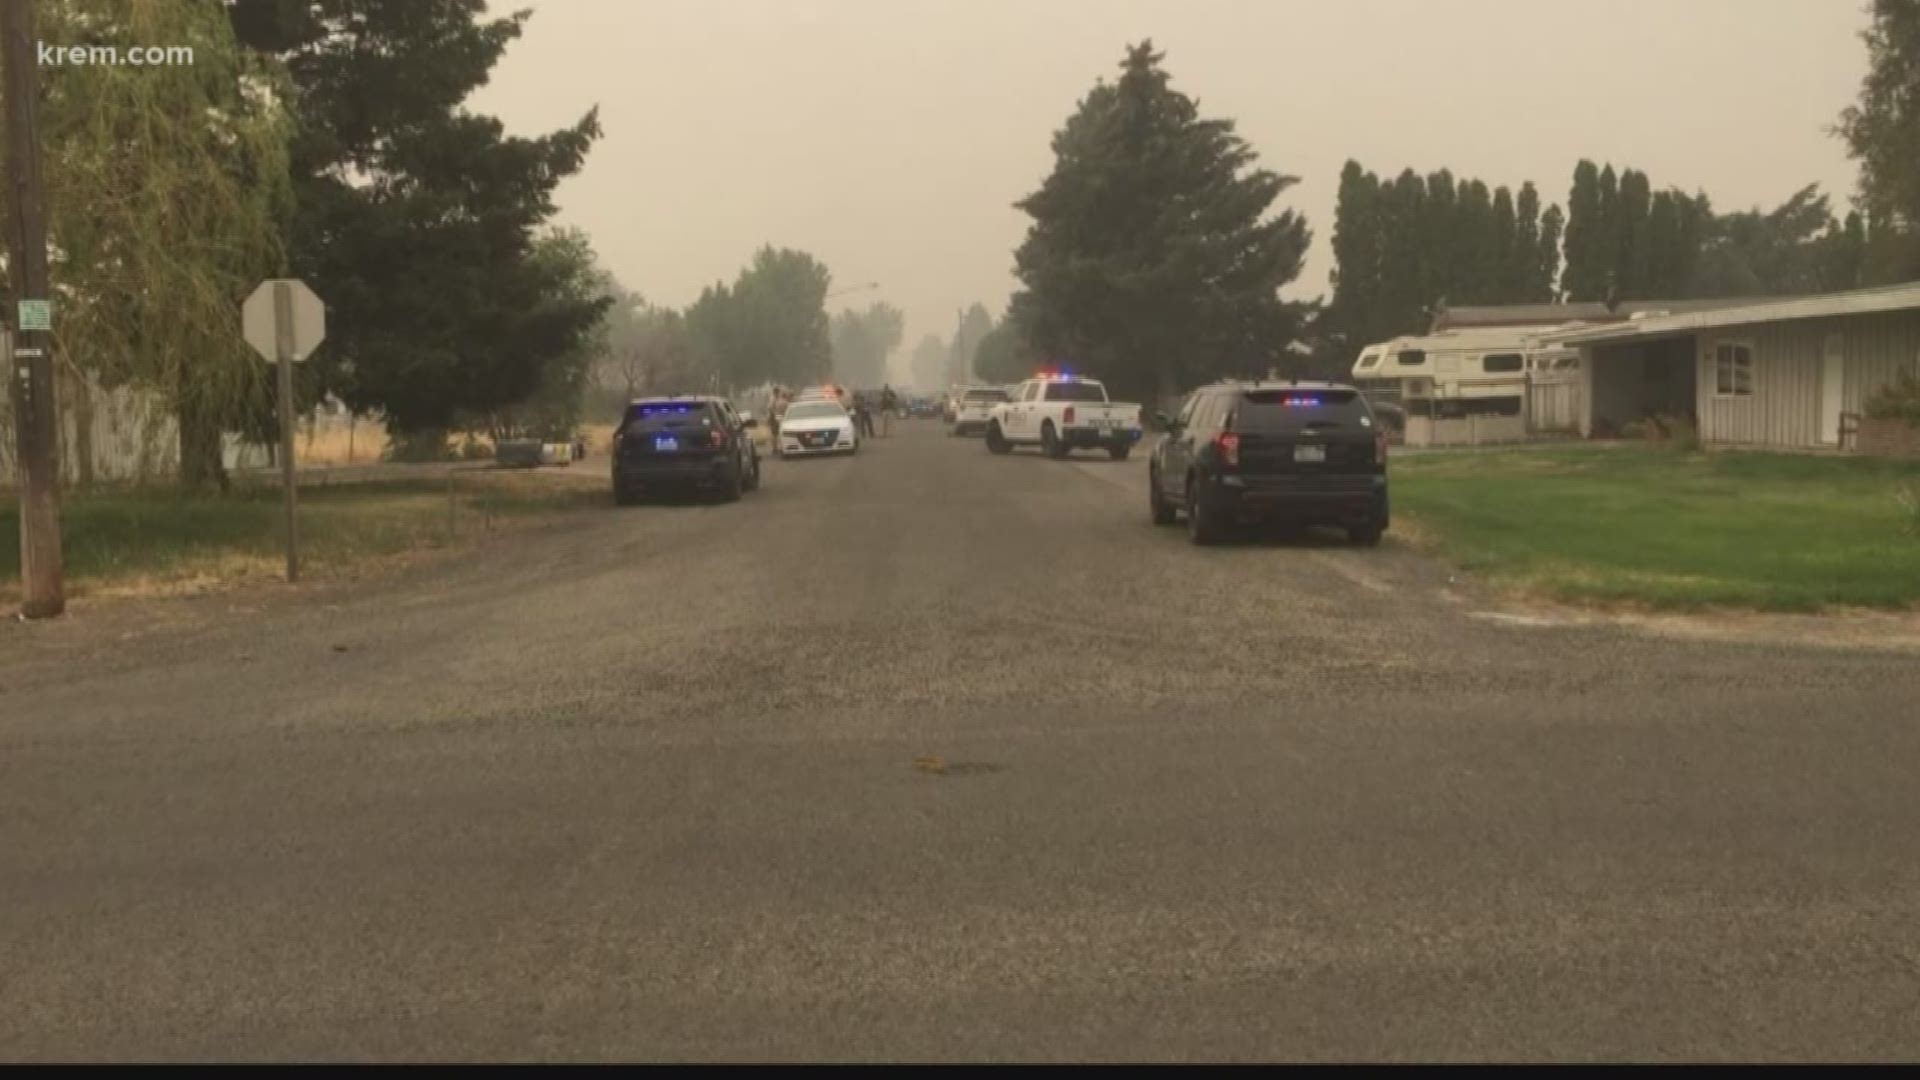 No officers were injured in an officer involved shooting that happened in Soap Lake on Sunday.